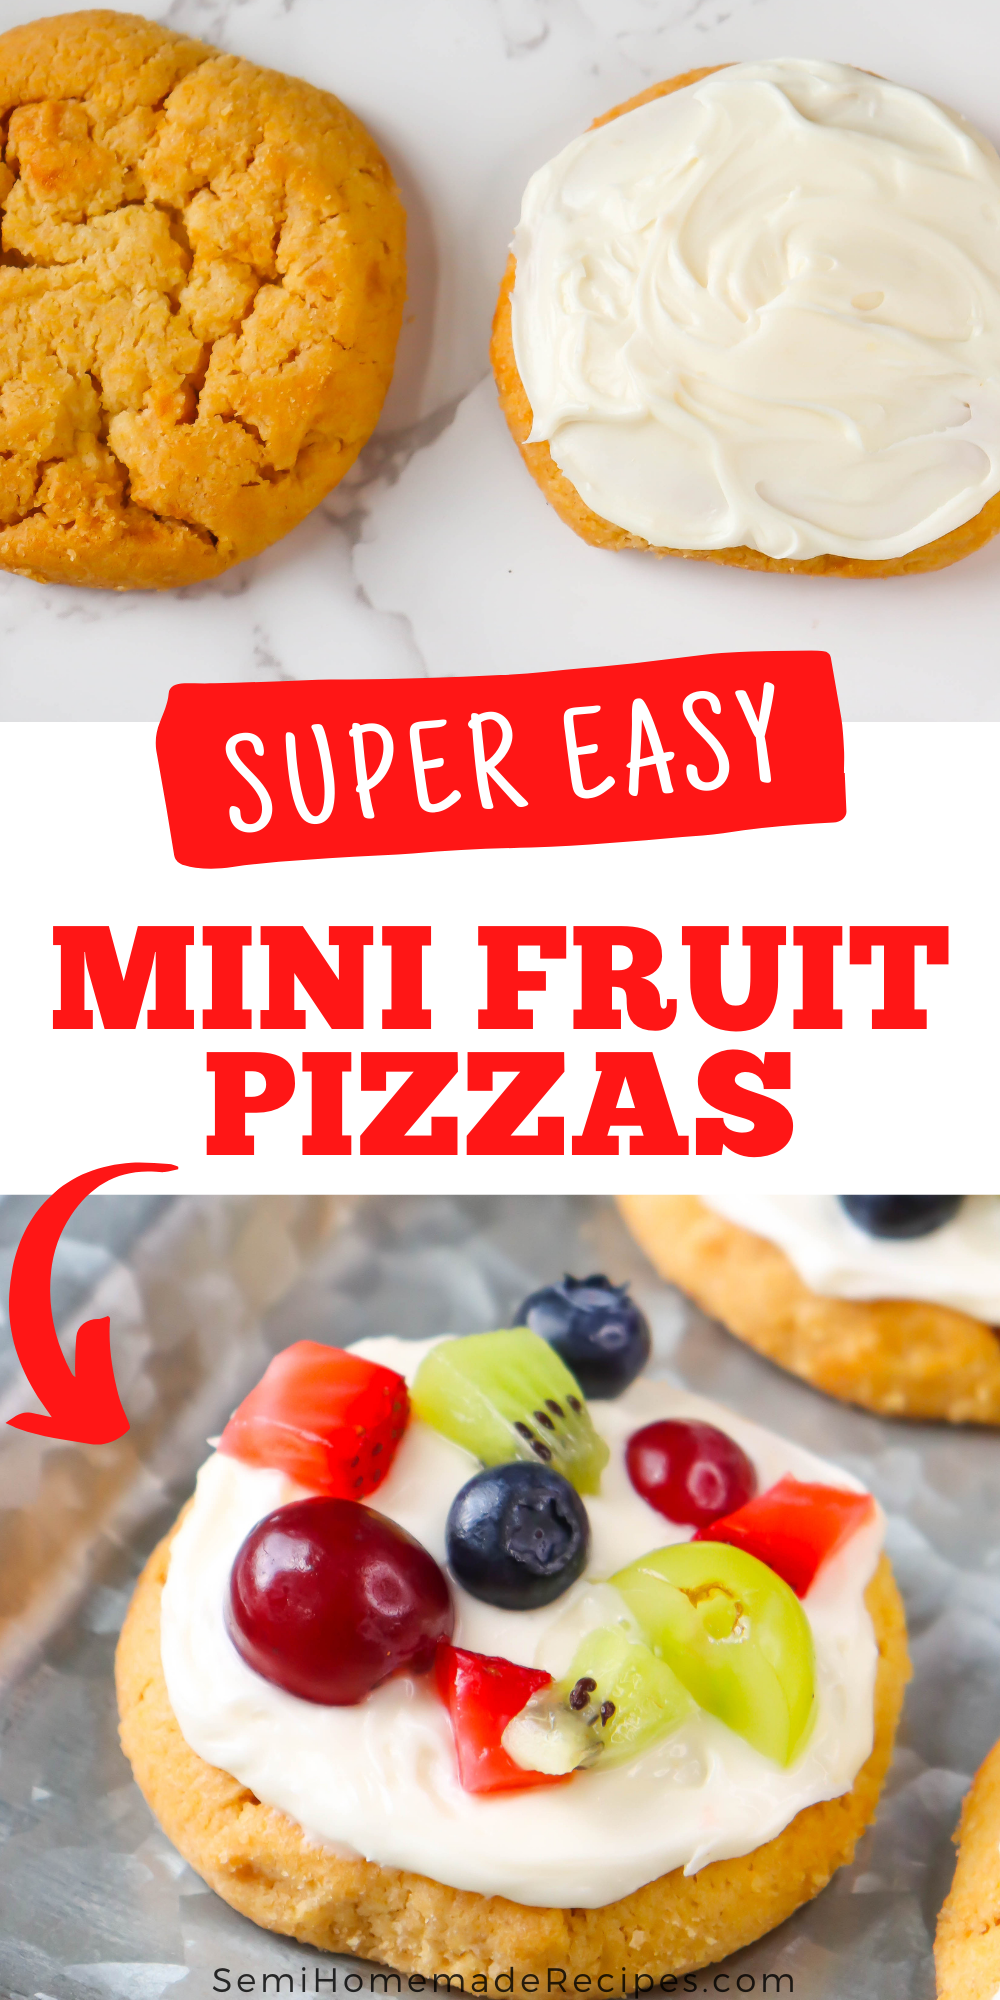 These sweet little mini fruit pizzas are the perfect semi homemade dessert for this summer! Made with sugar cookies, frosting and fresh summer fruit!